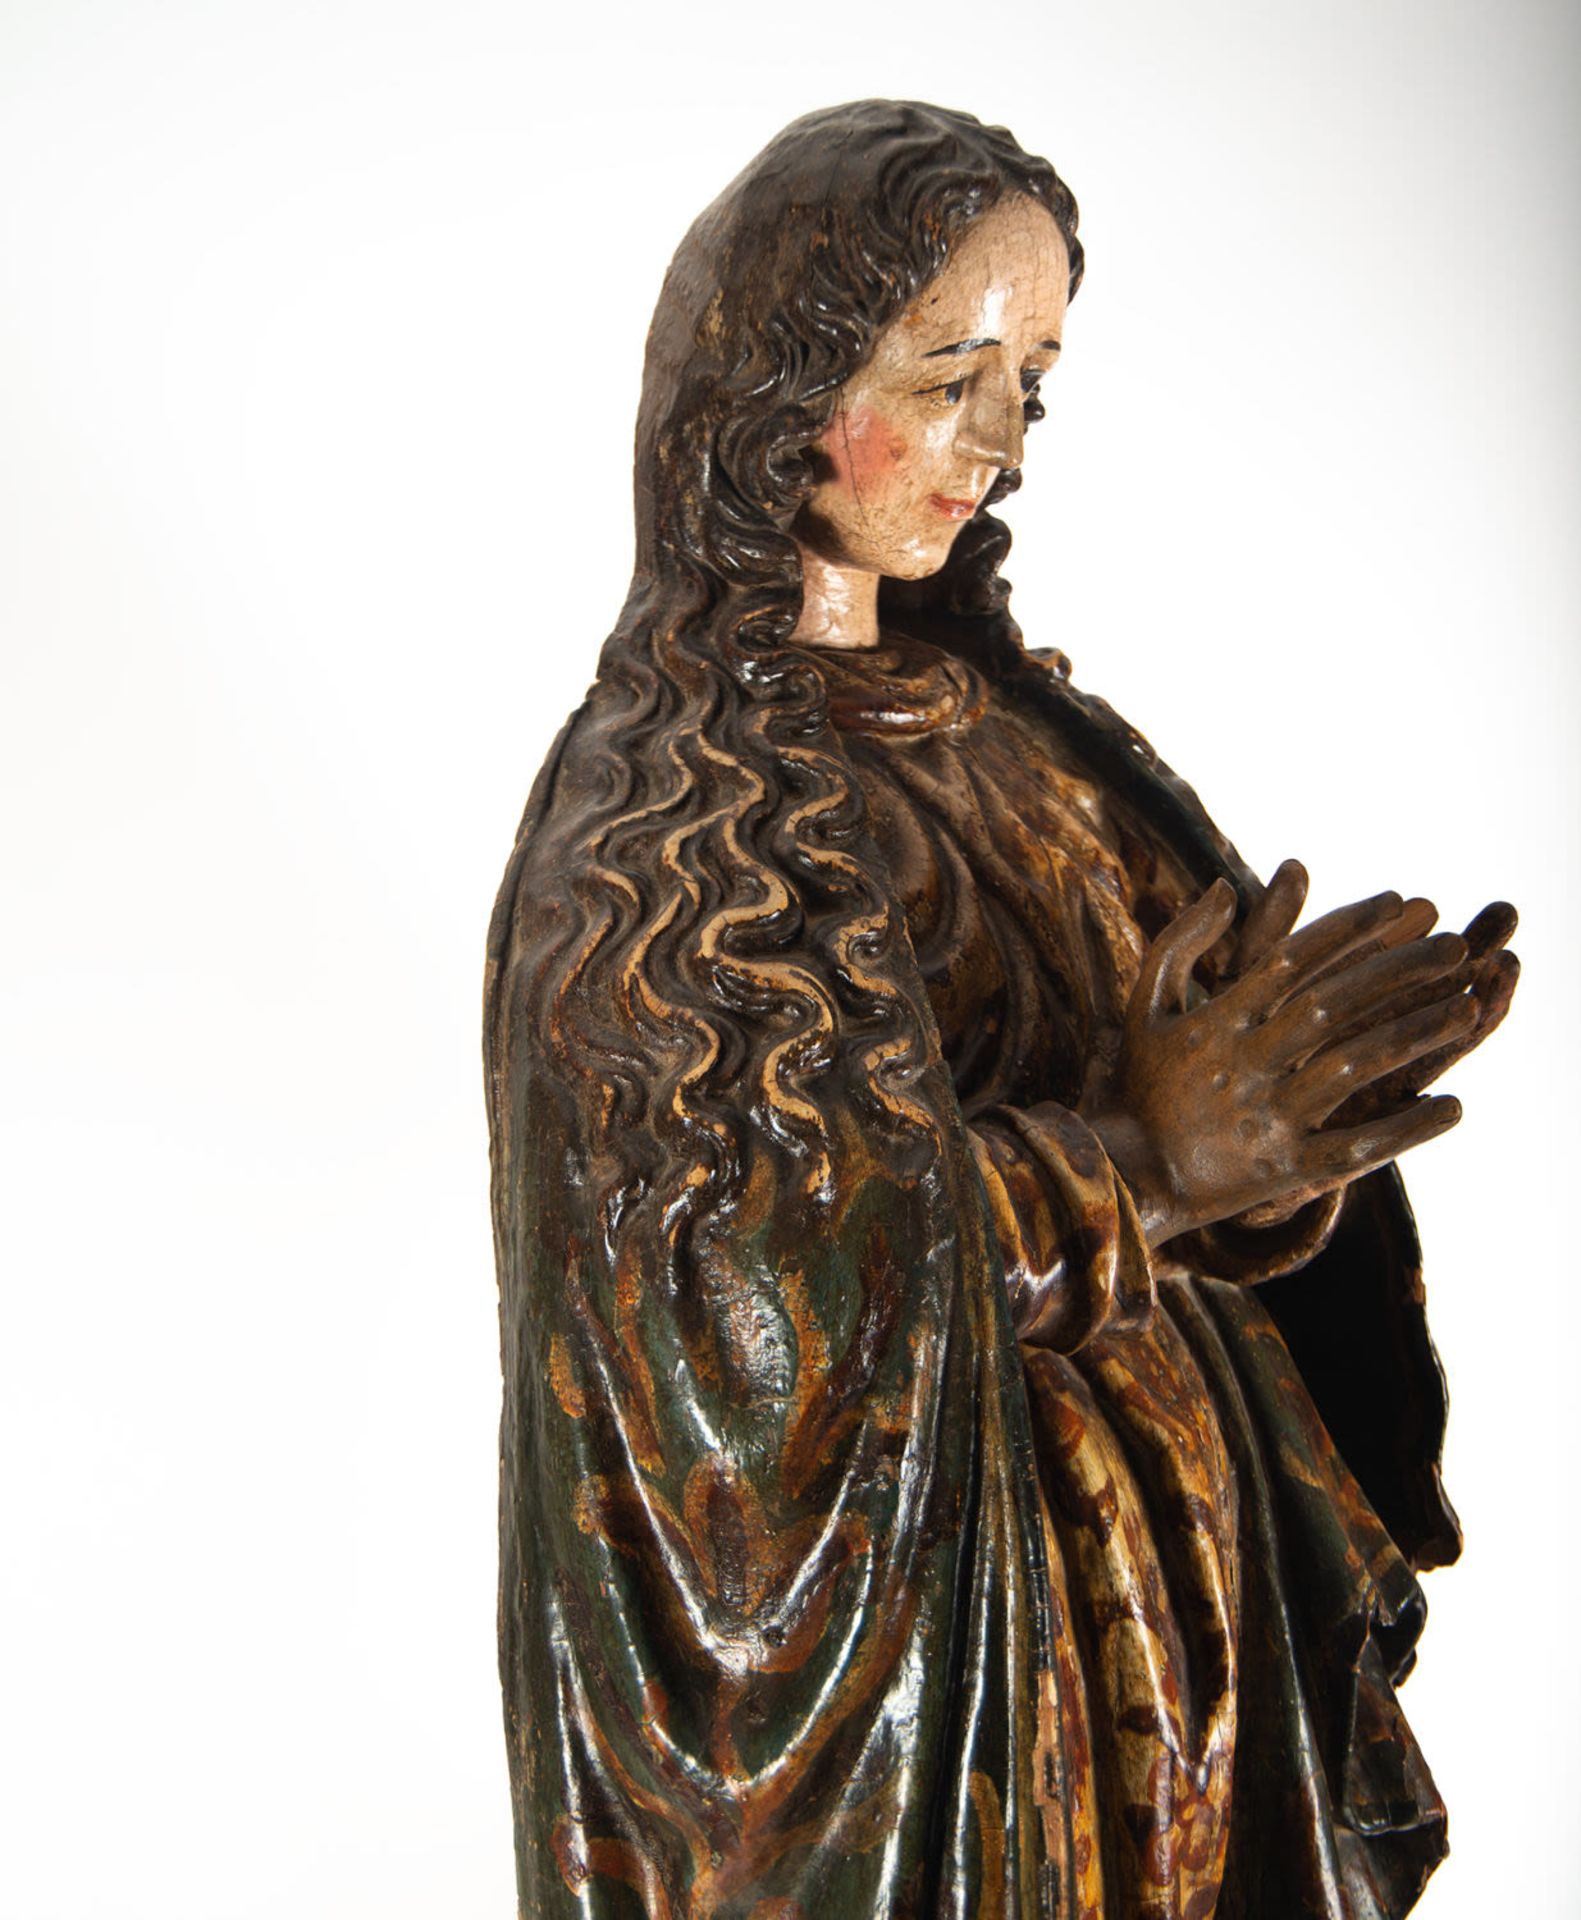 Great Immaculate Virgin, 17th century, possibly Cuzco, 17th century Cuzco colonial school - Image 11 of 14